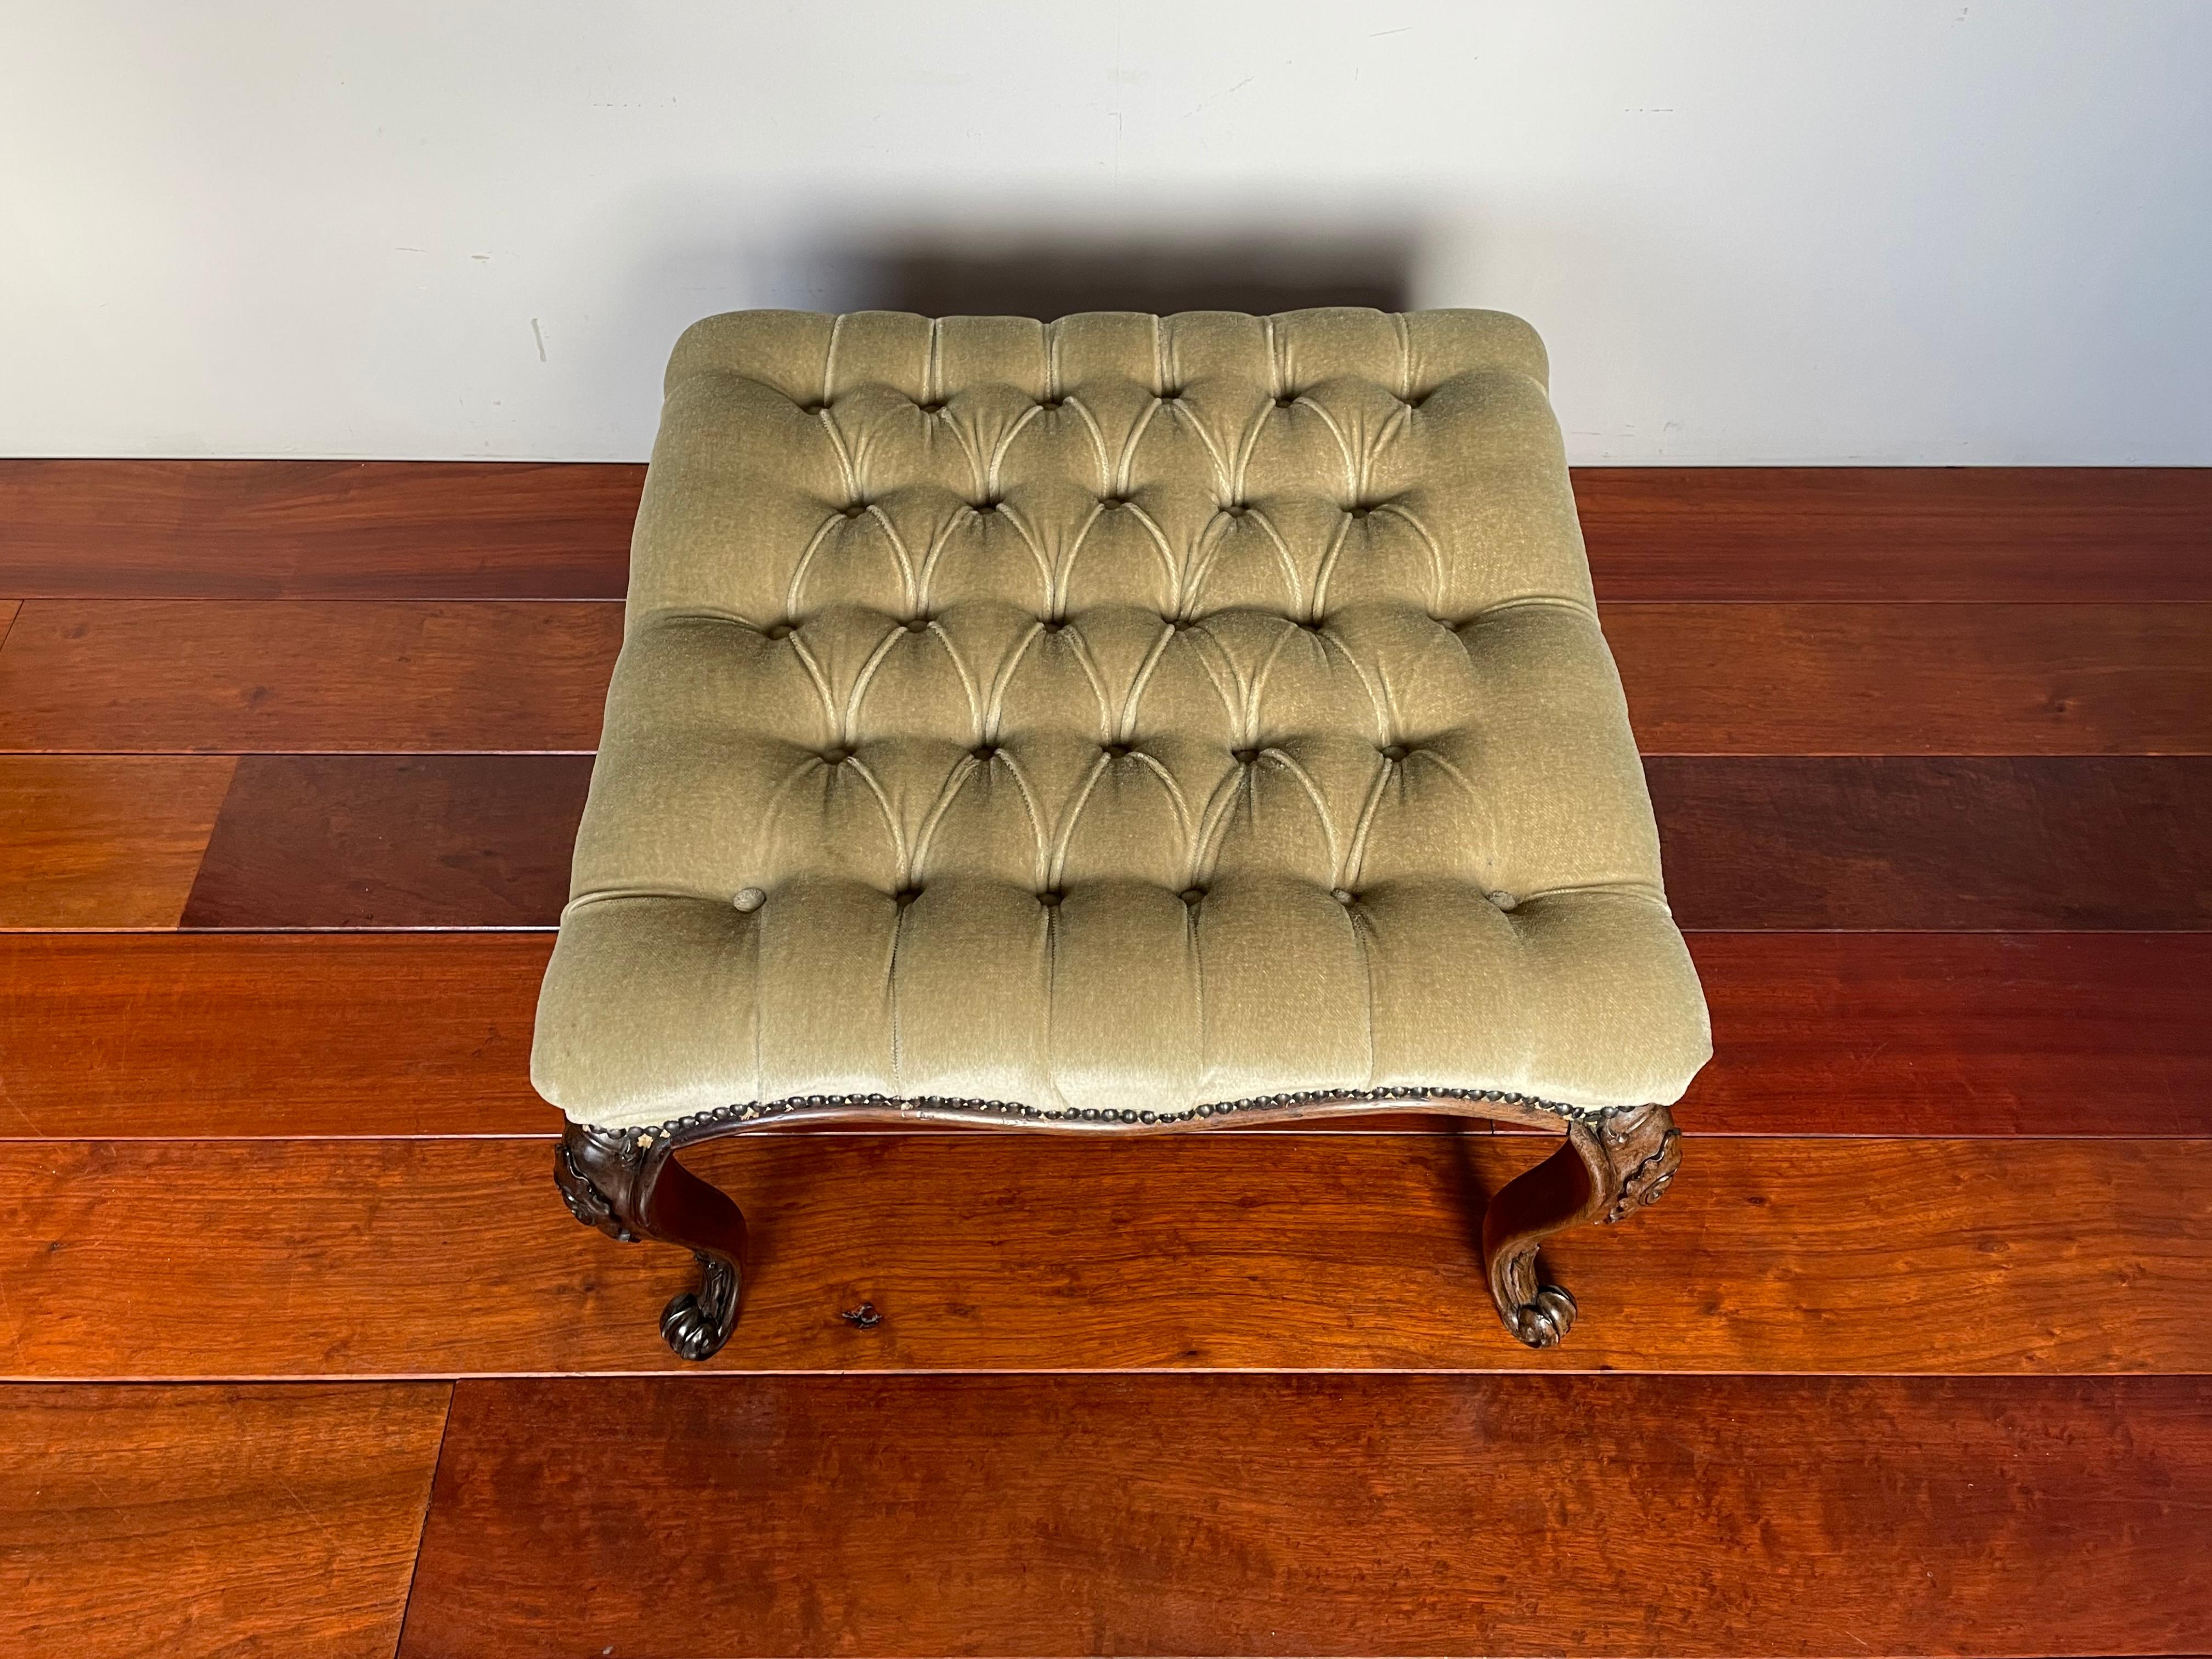 Stylish and excellent condition antique footstool.

This incredibly good looking, large size and beautifully designed antique stool is as strong and stabile as the day it was handcrafted. It will easily take the weight of a grown-up, but we believe